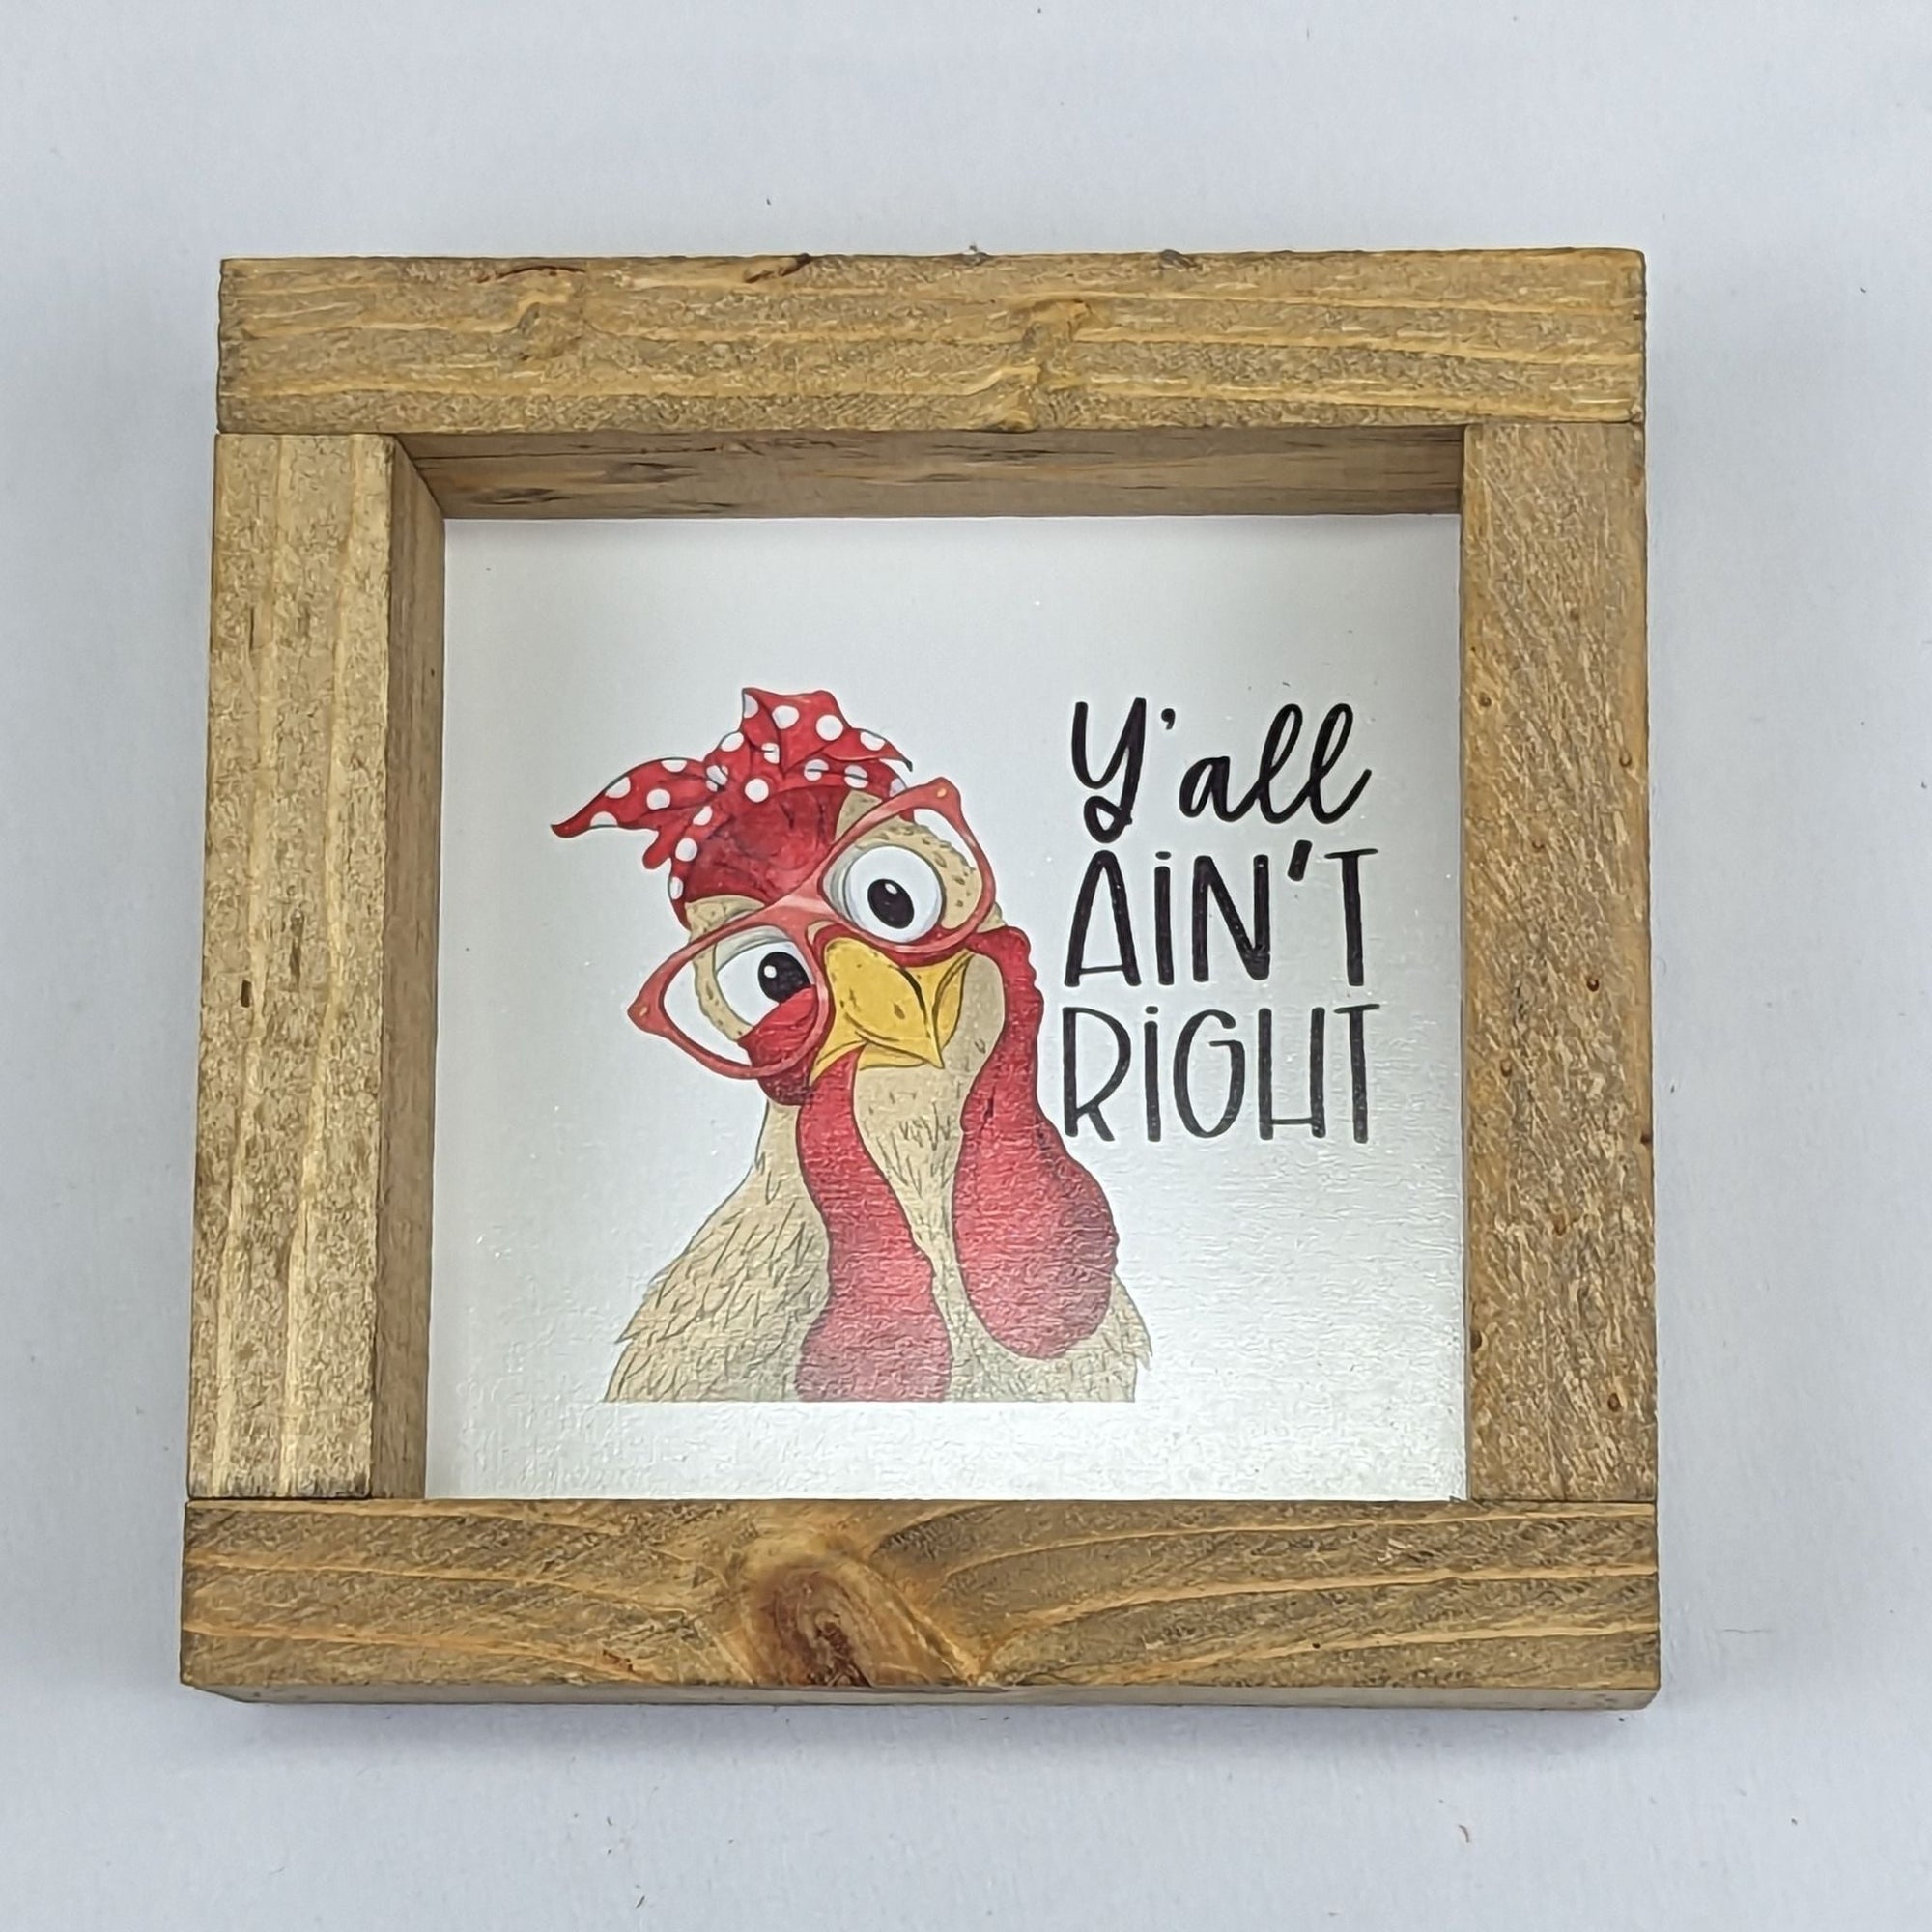 6" x 6" 'Ya'll Ain't Right' Chicken Sign With Wood Frame - Cluck It All Farms